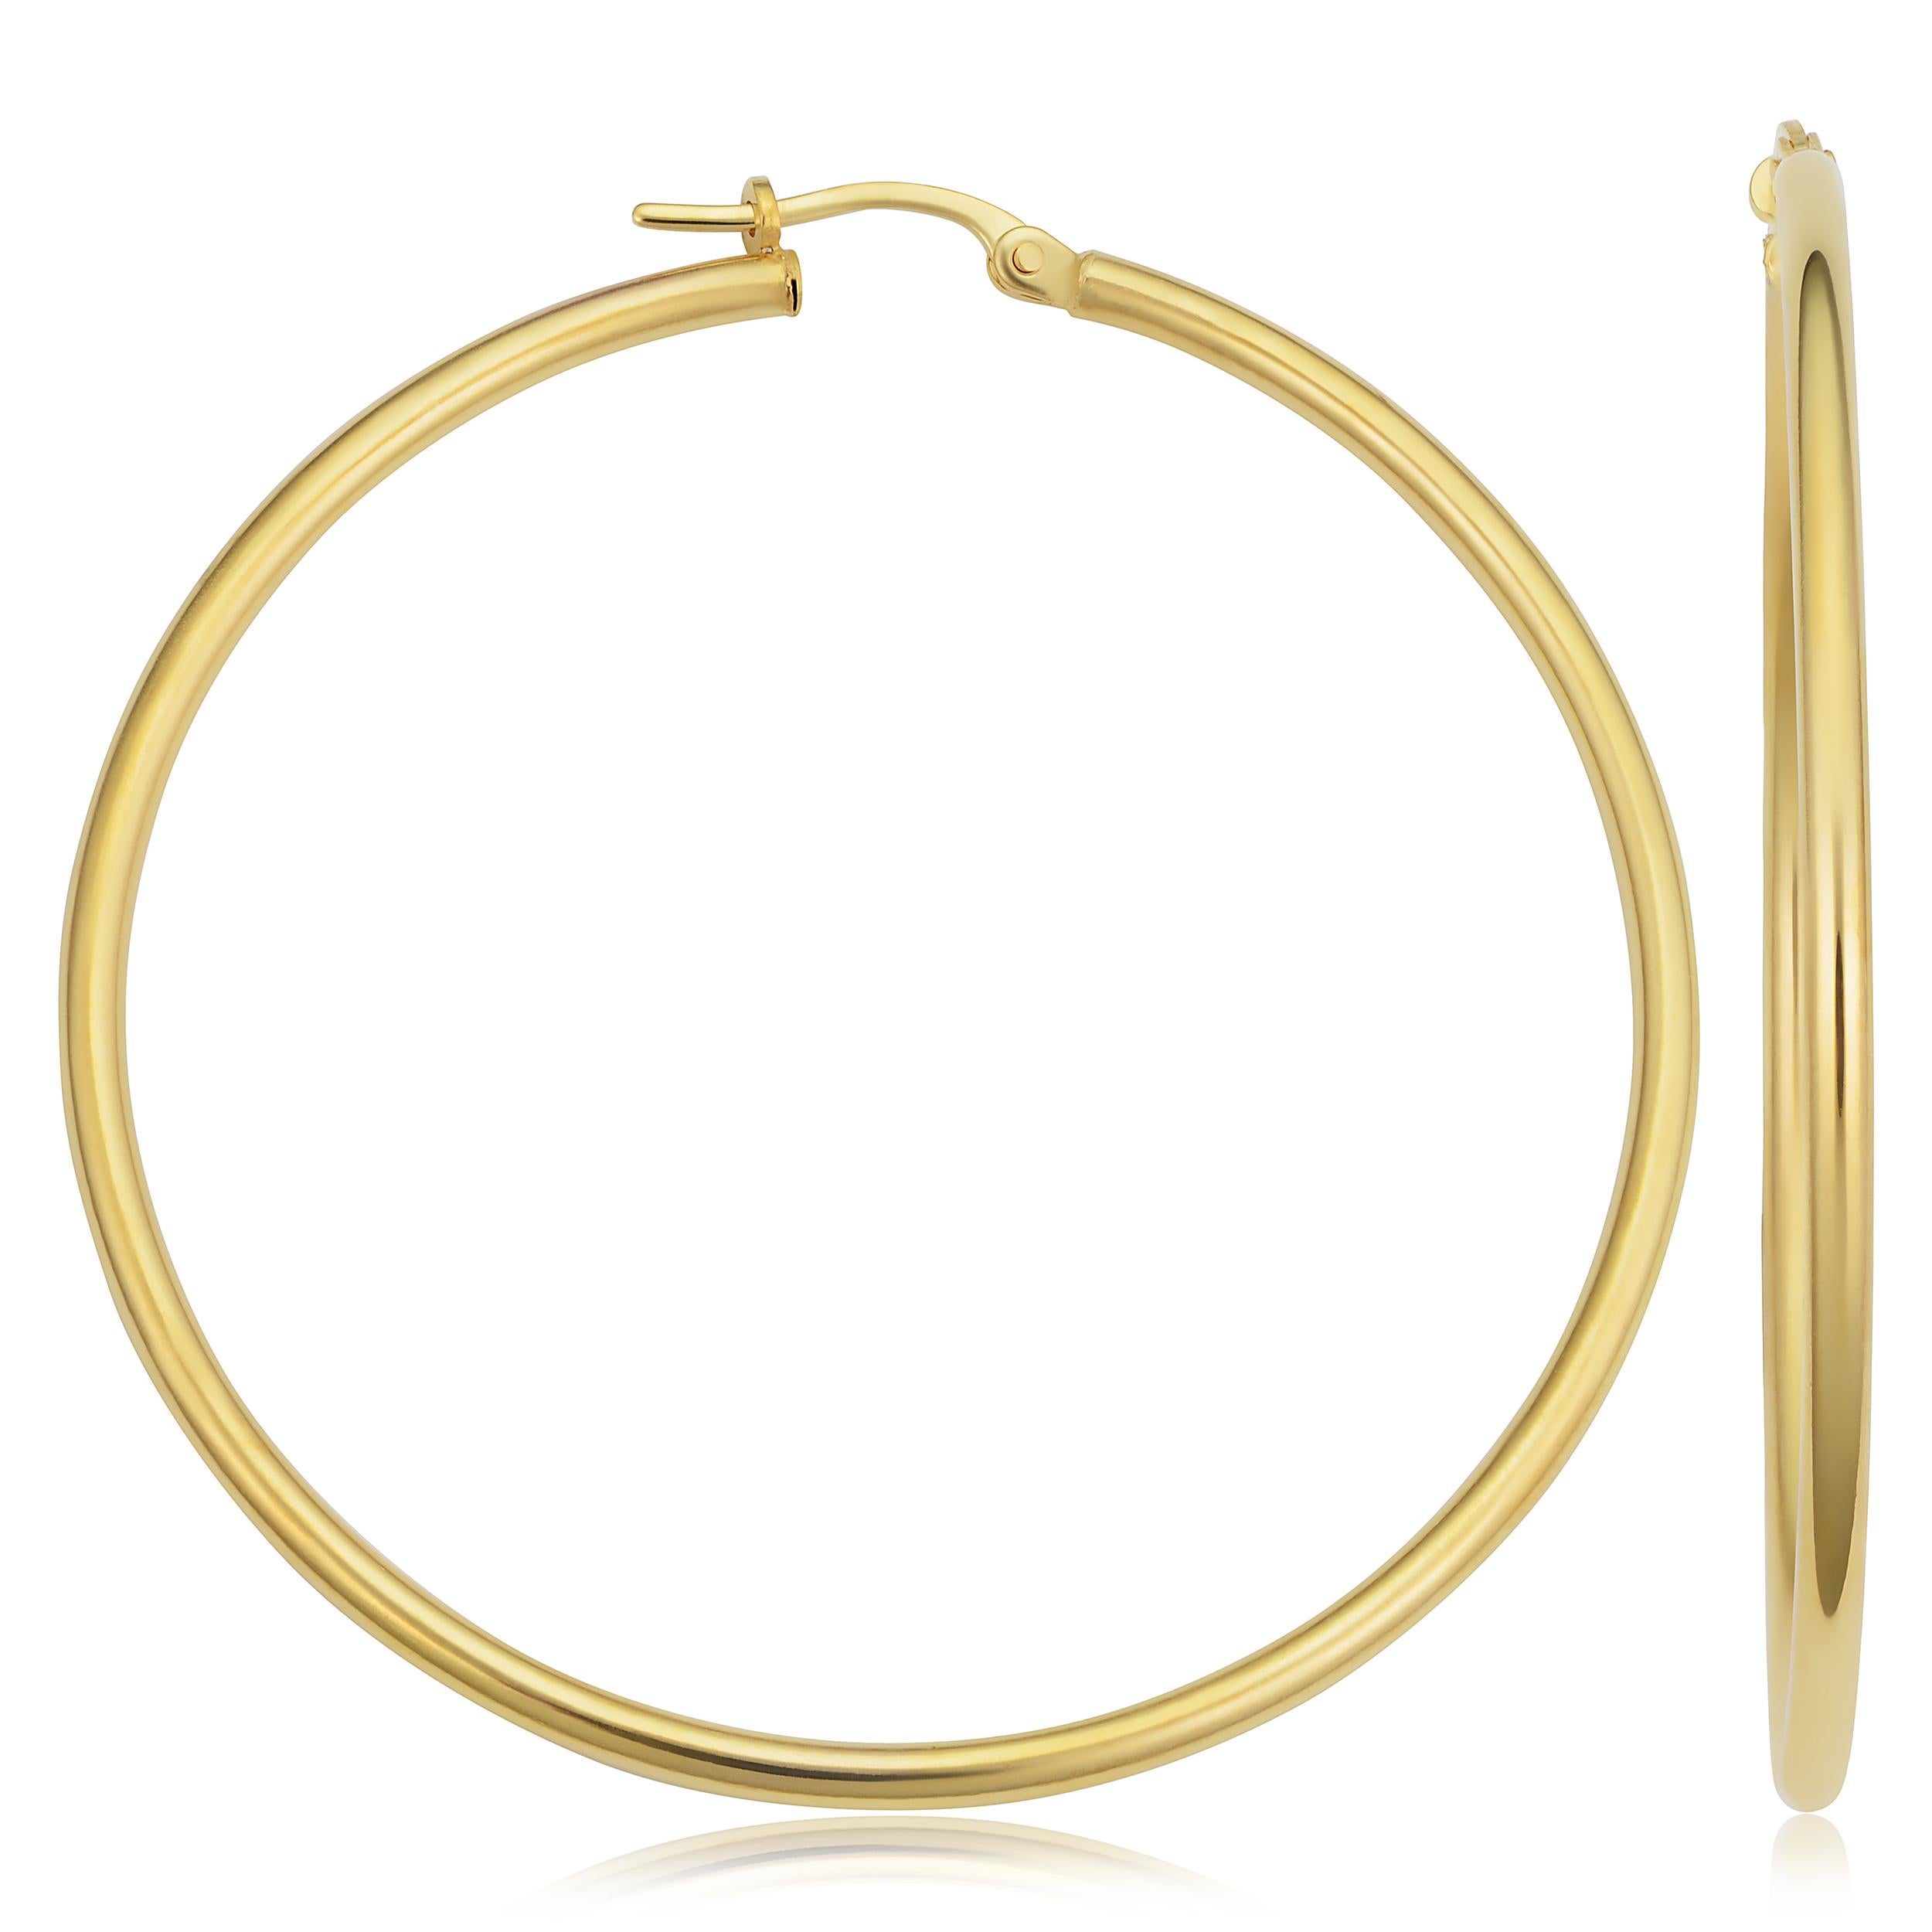 These Elegant and Stylish 14K Yellow Gold Hoop Earrings will add that perfect Glam to your look! Earring Measurements are 2x50 MM. 
Made in Italy. 
1.25